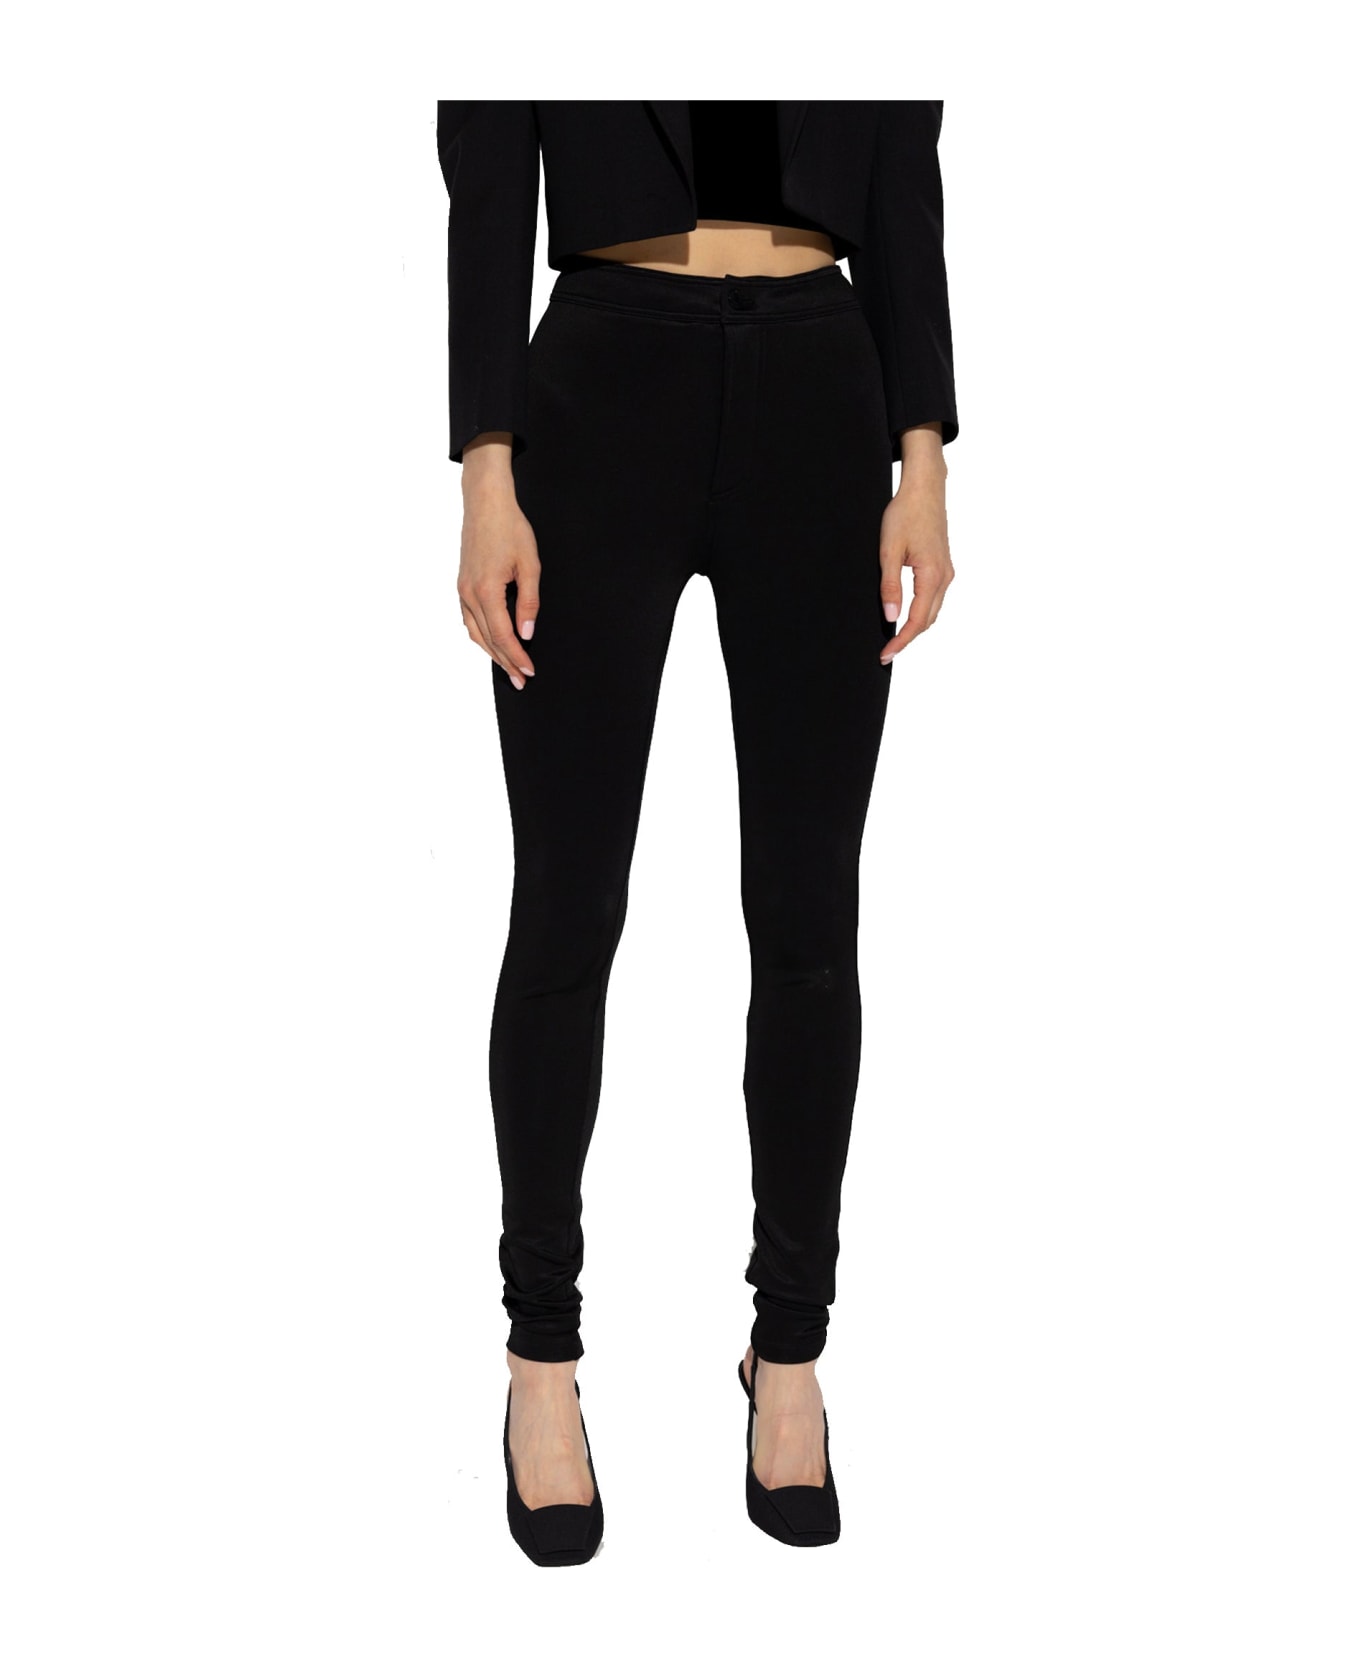 Saint Laurent Drawstring Fitted Trousers - Black ボトムス